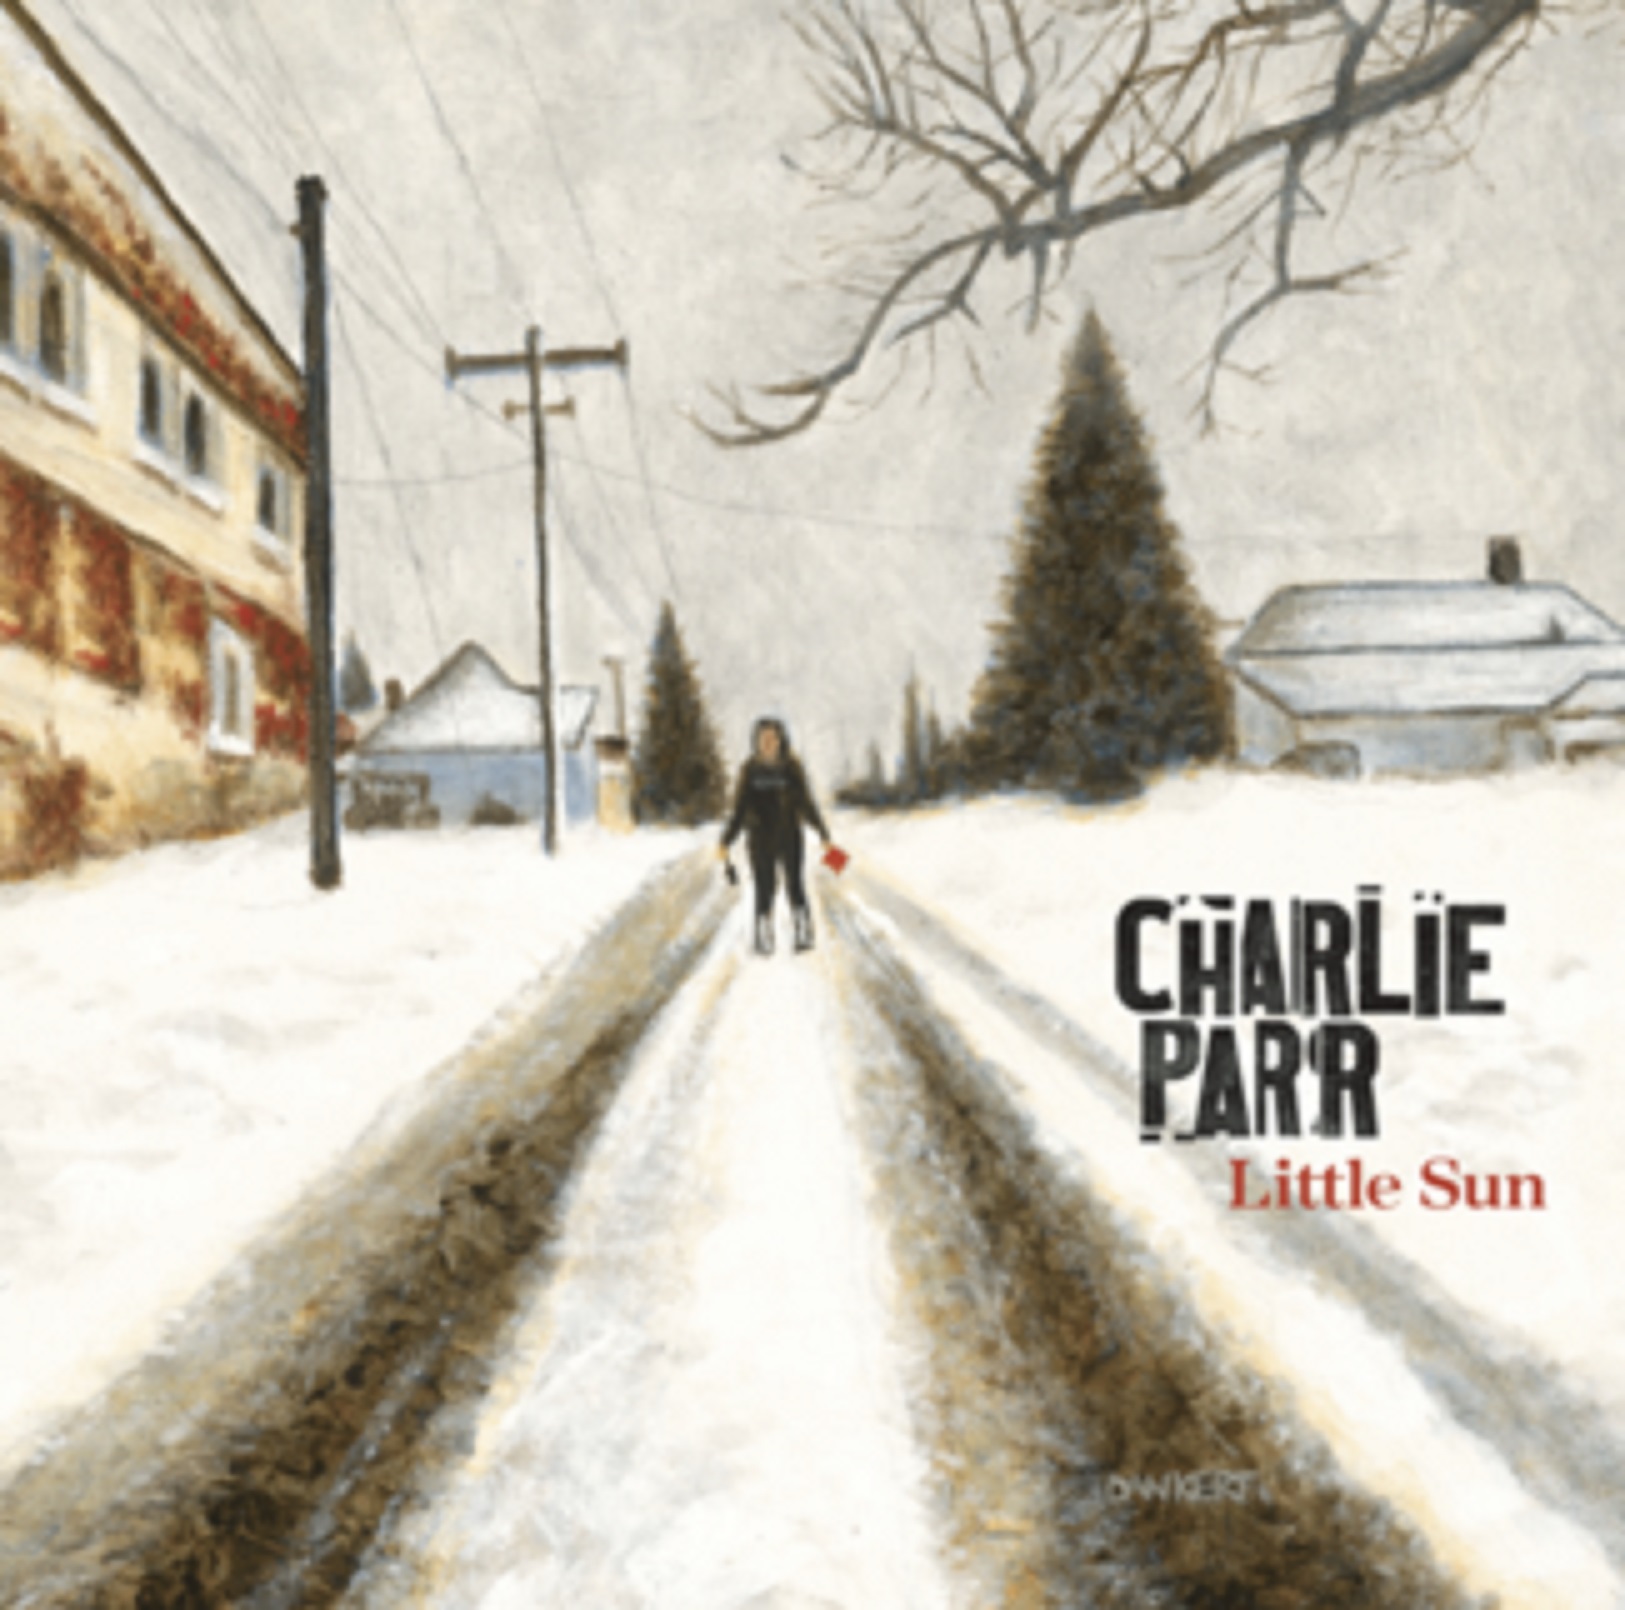 Charlie Parr's new album "Little Sun" out today via Smithsonian Folkways